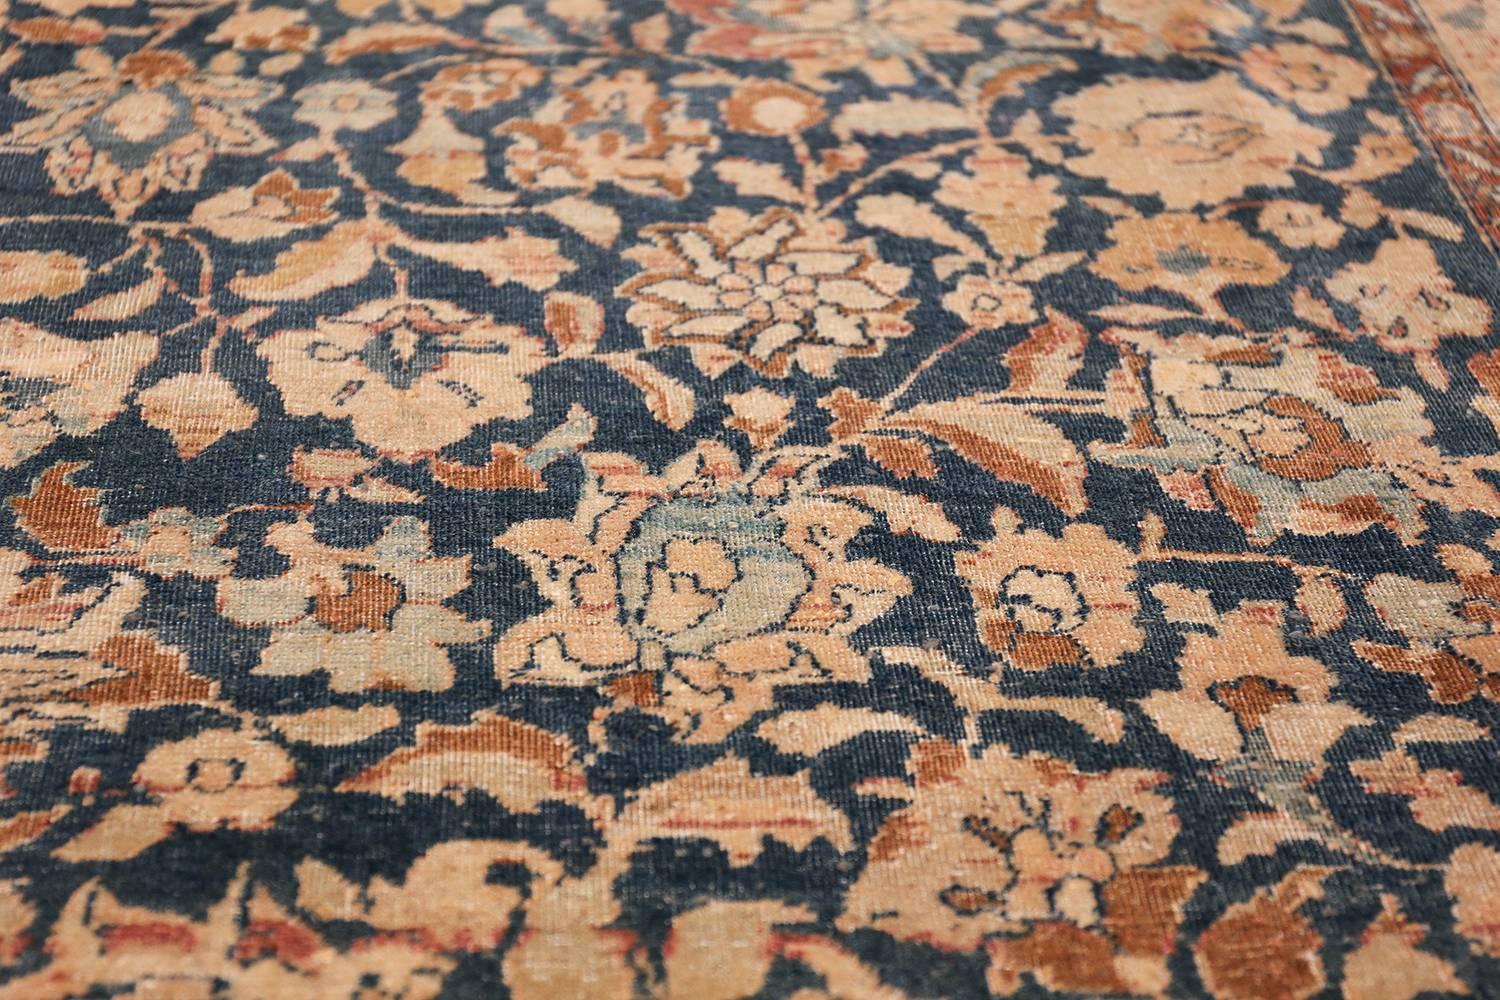 Hand-Knotted Blue Room Size Antique Persian Isfahan Rug. Size: 7 ft x 11 ft 8 in